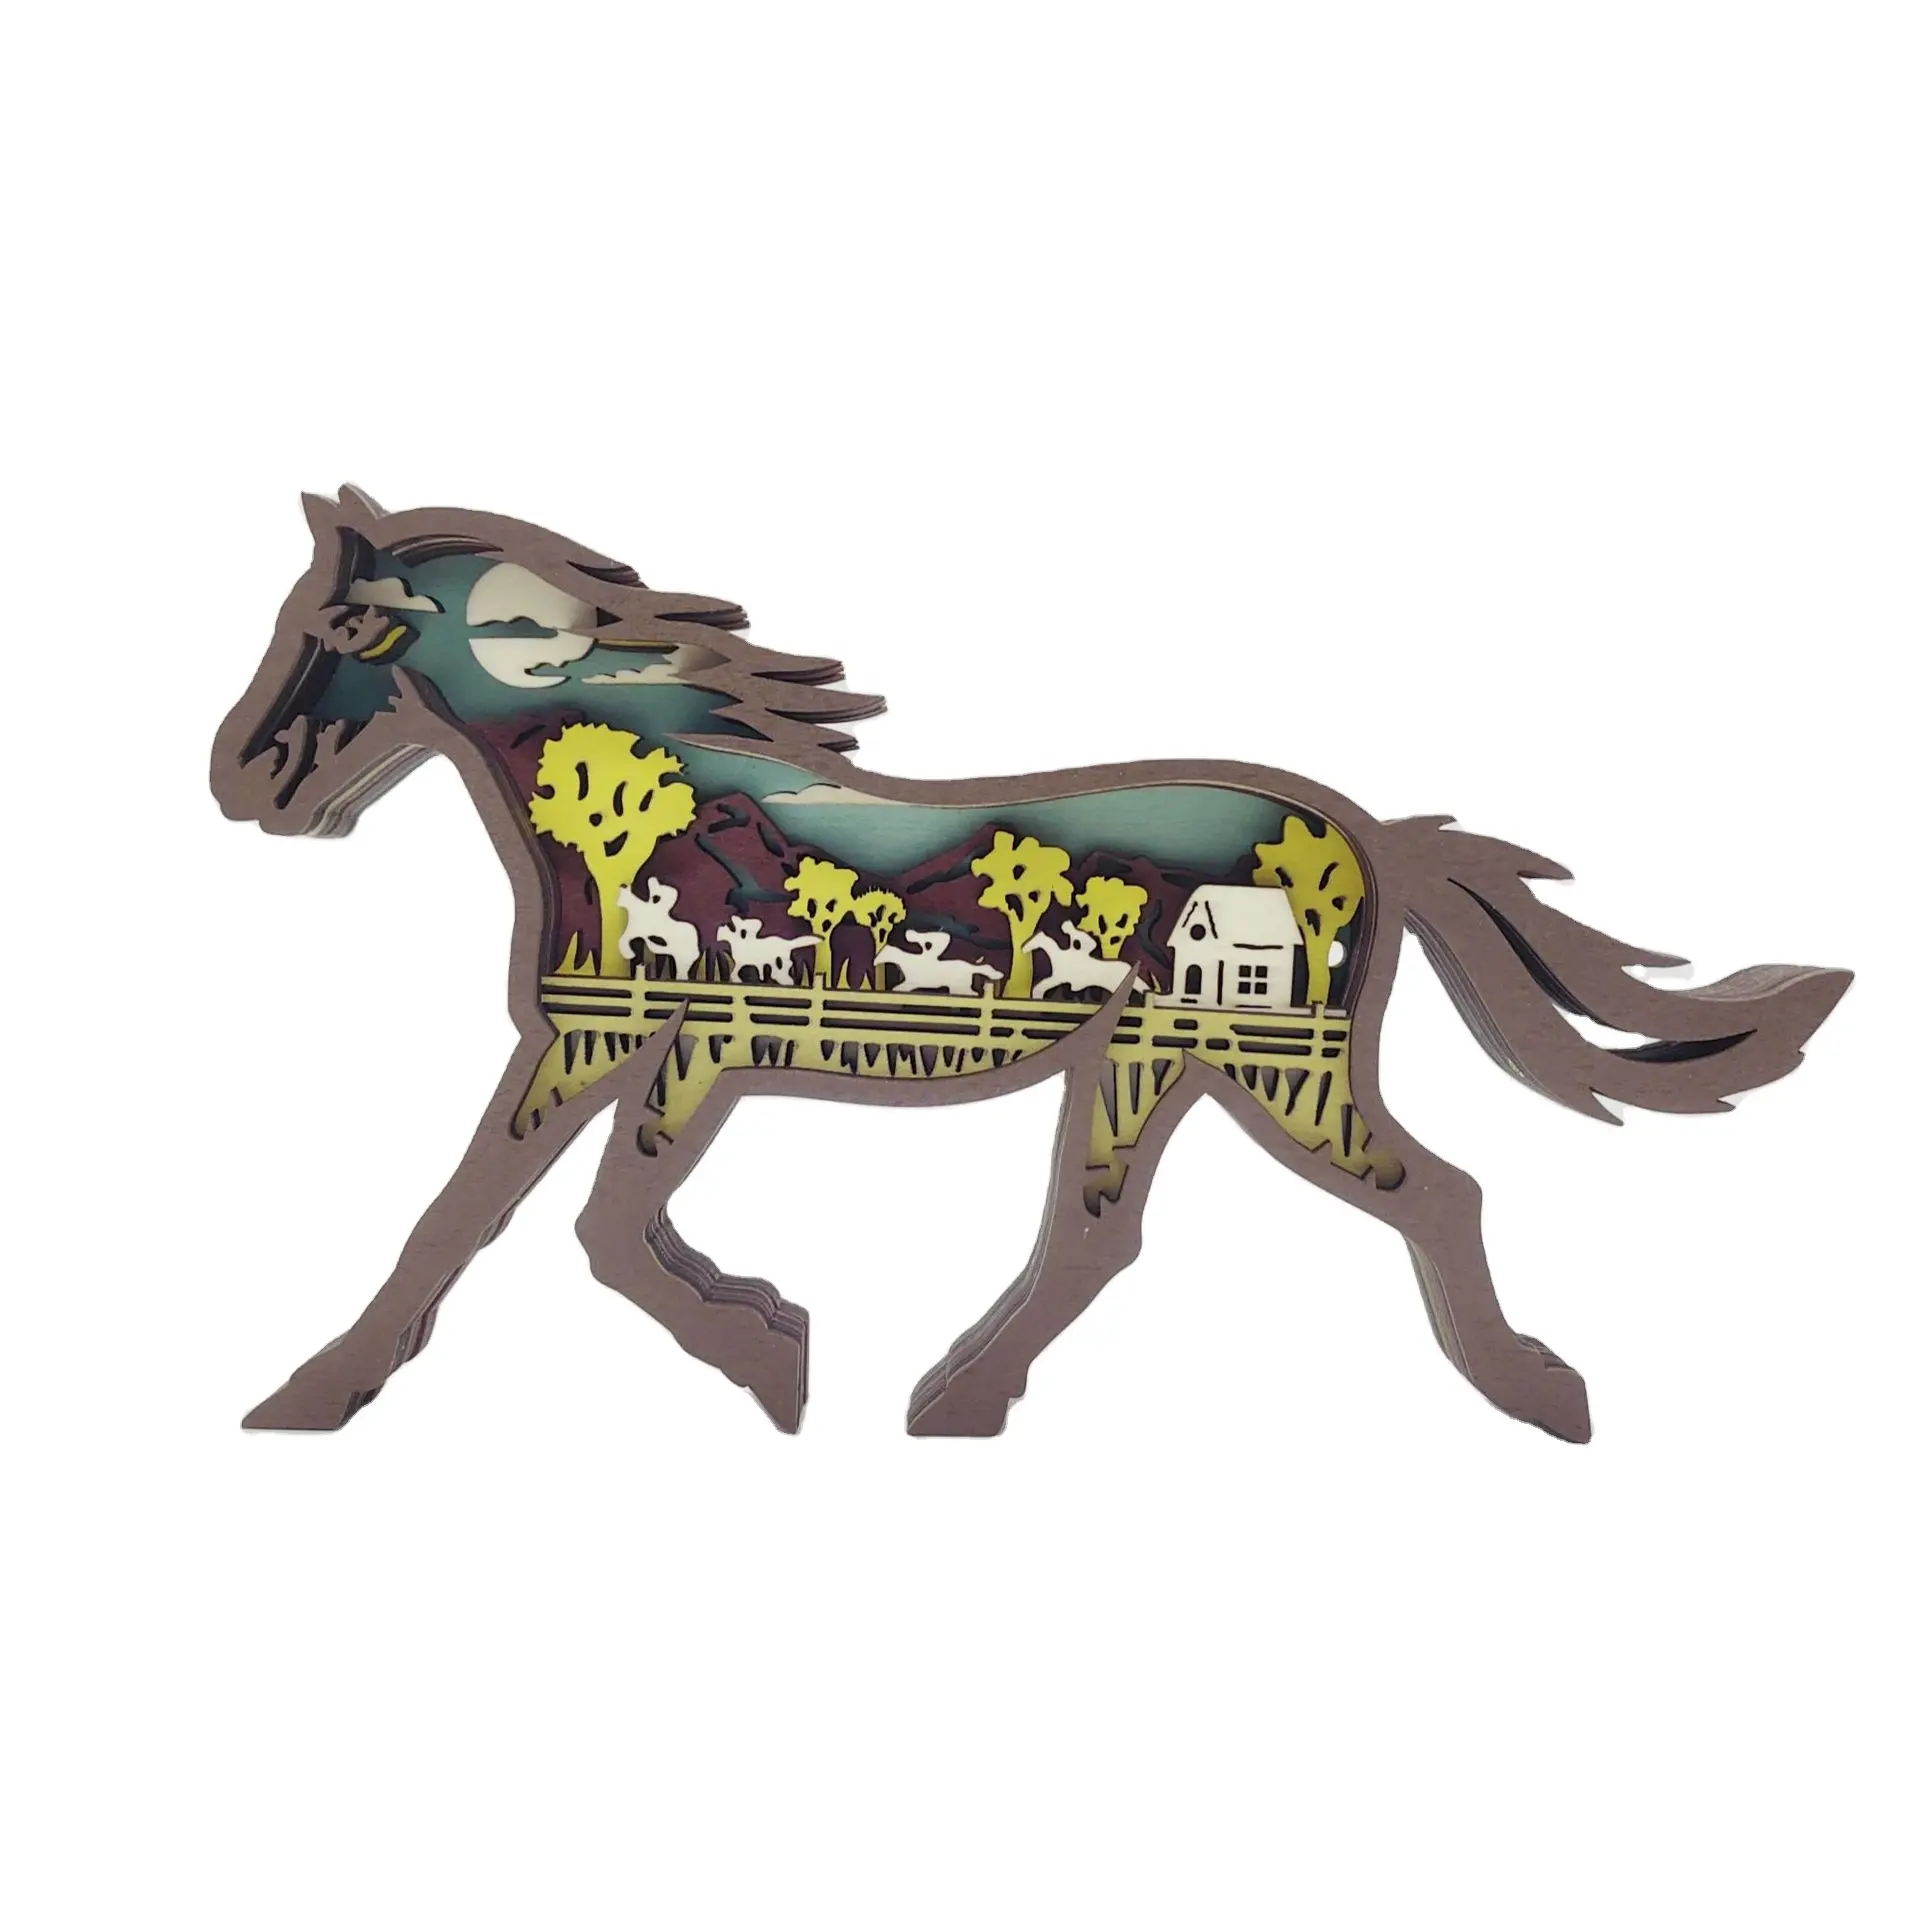 New Animal Wood Carved Horse Crafts Creative Home Desktop Decorations Multi-layer Hollow Horse Ornaments